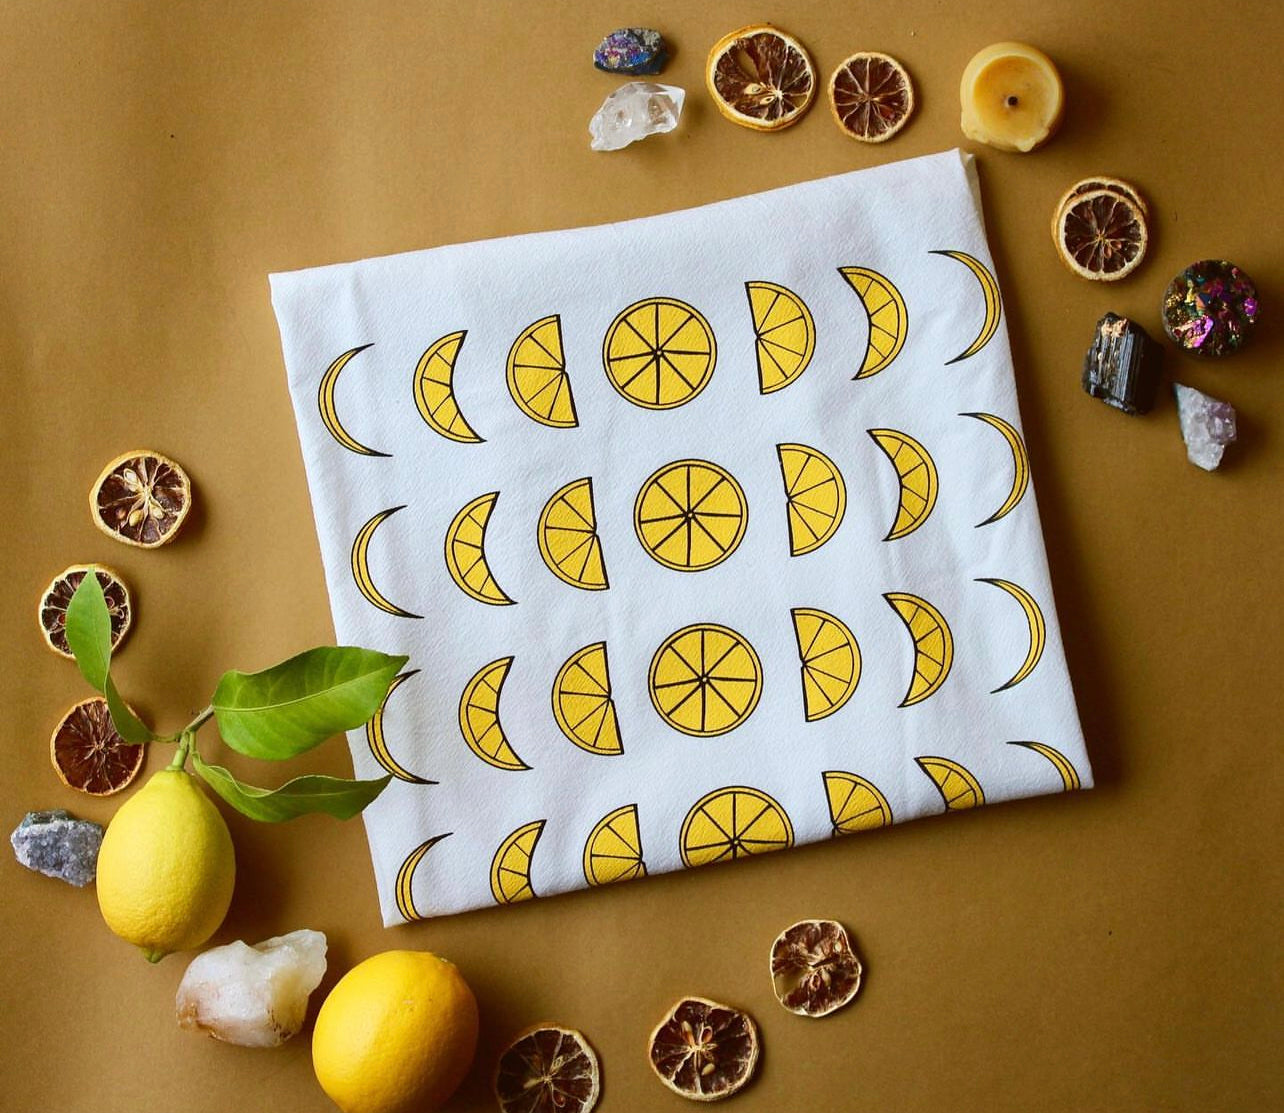 White tea towel with lemon moon phases design surrounded by fresh and preserved lemons